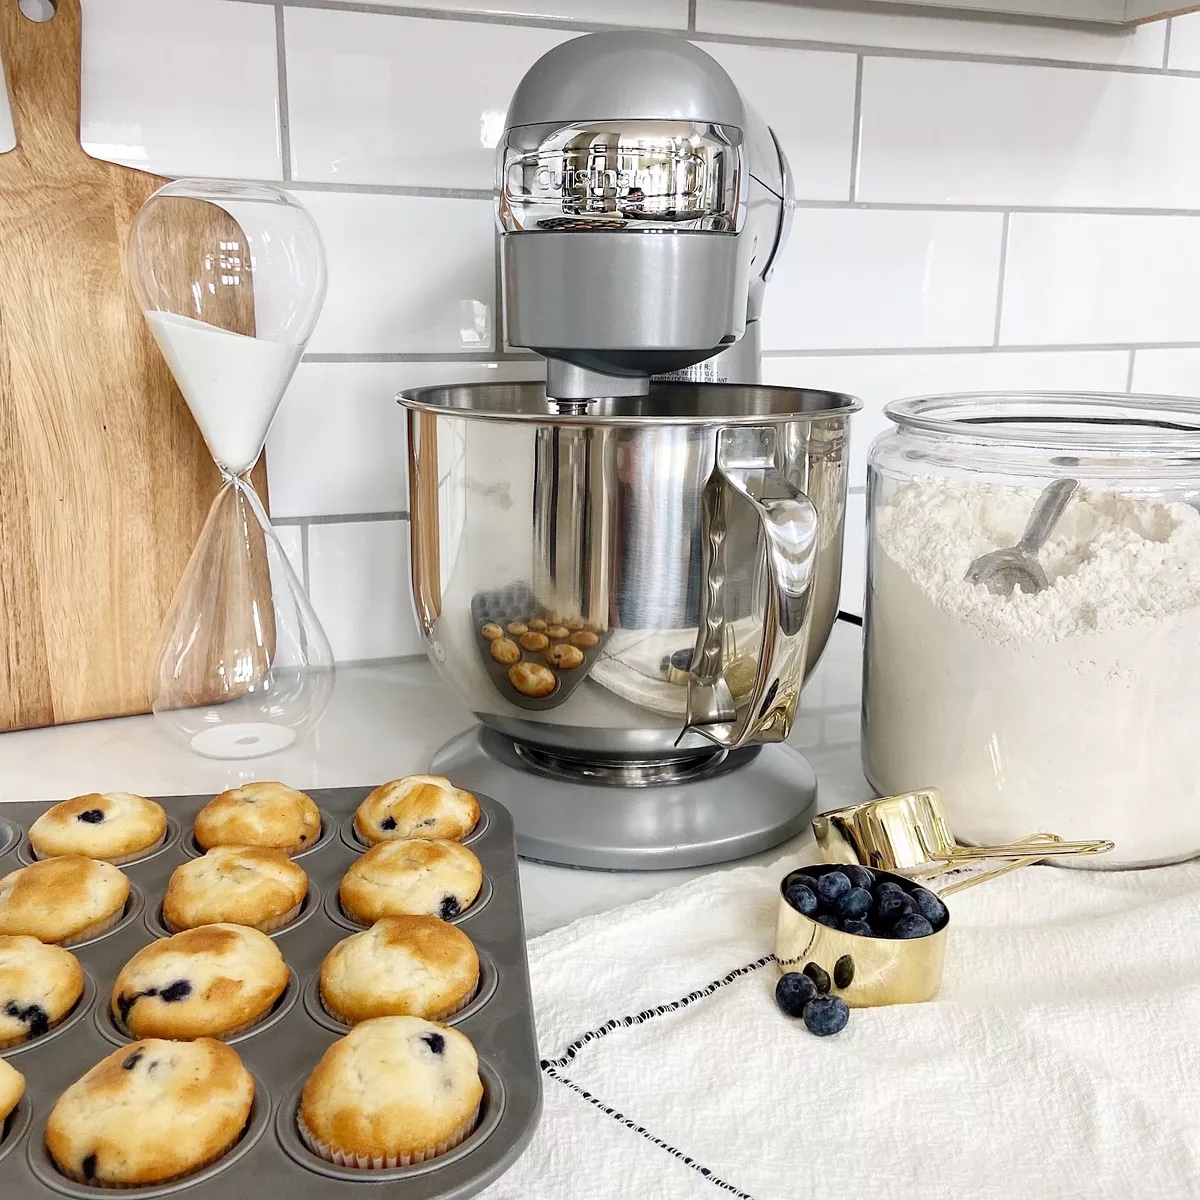 Cuisinart stand Mixer on a counter with a jar of flour, a cup of blueberries, and a pan of muffins